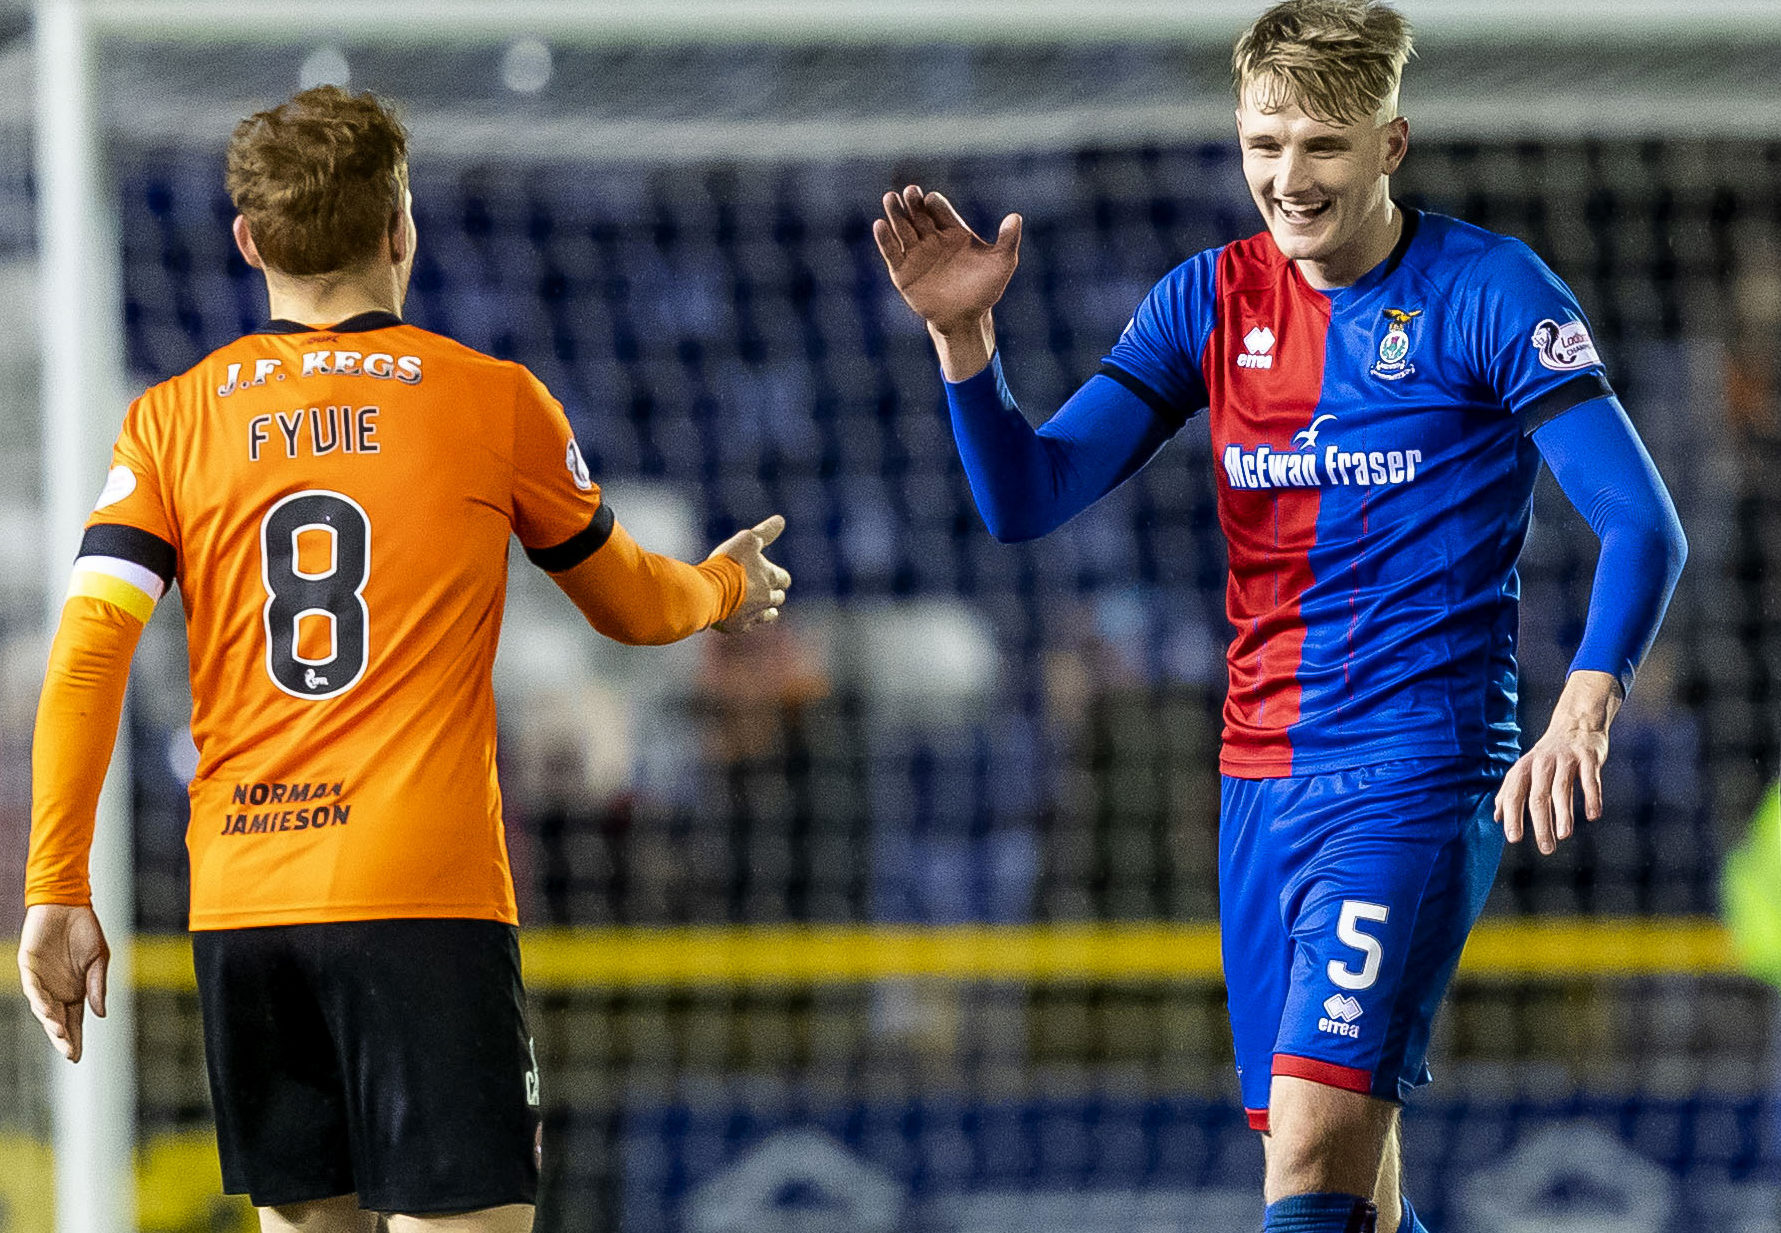 Inverness' Coll Donaldson with Dundee United captain Fraser Fyvie.